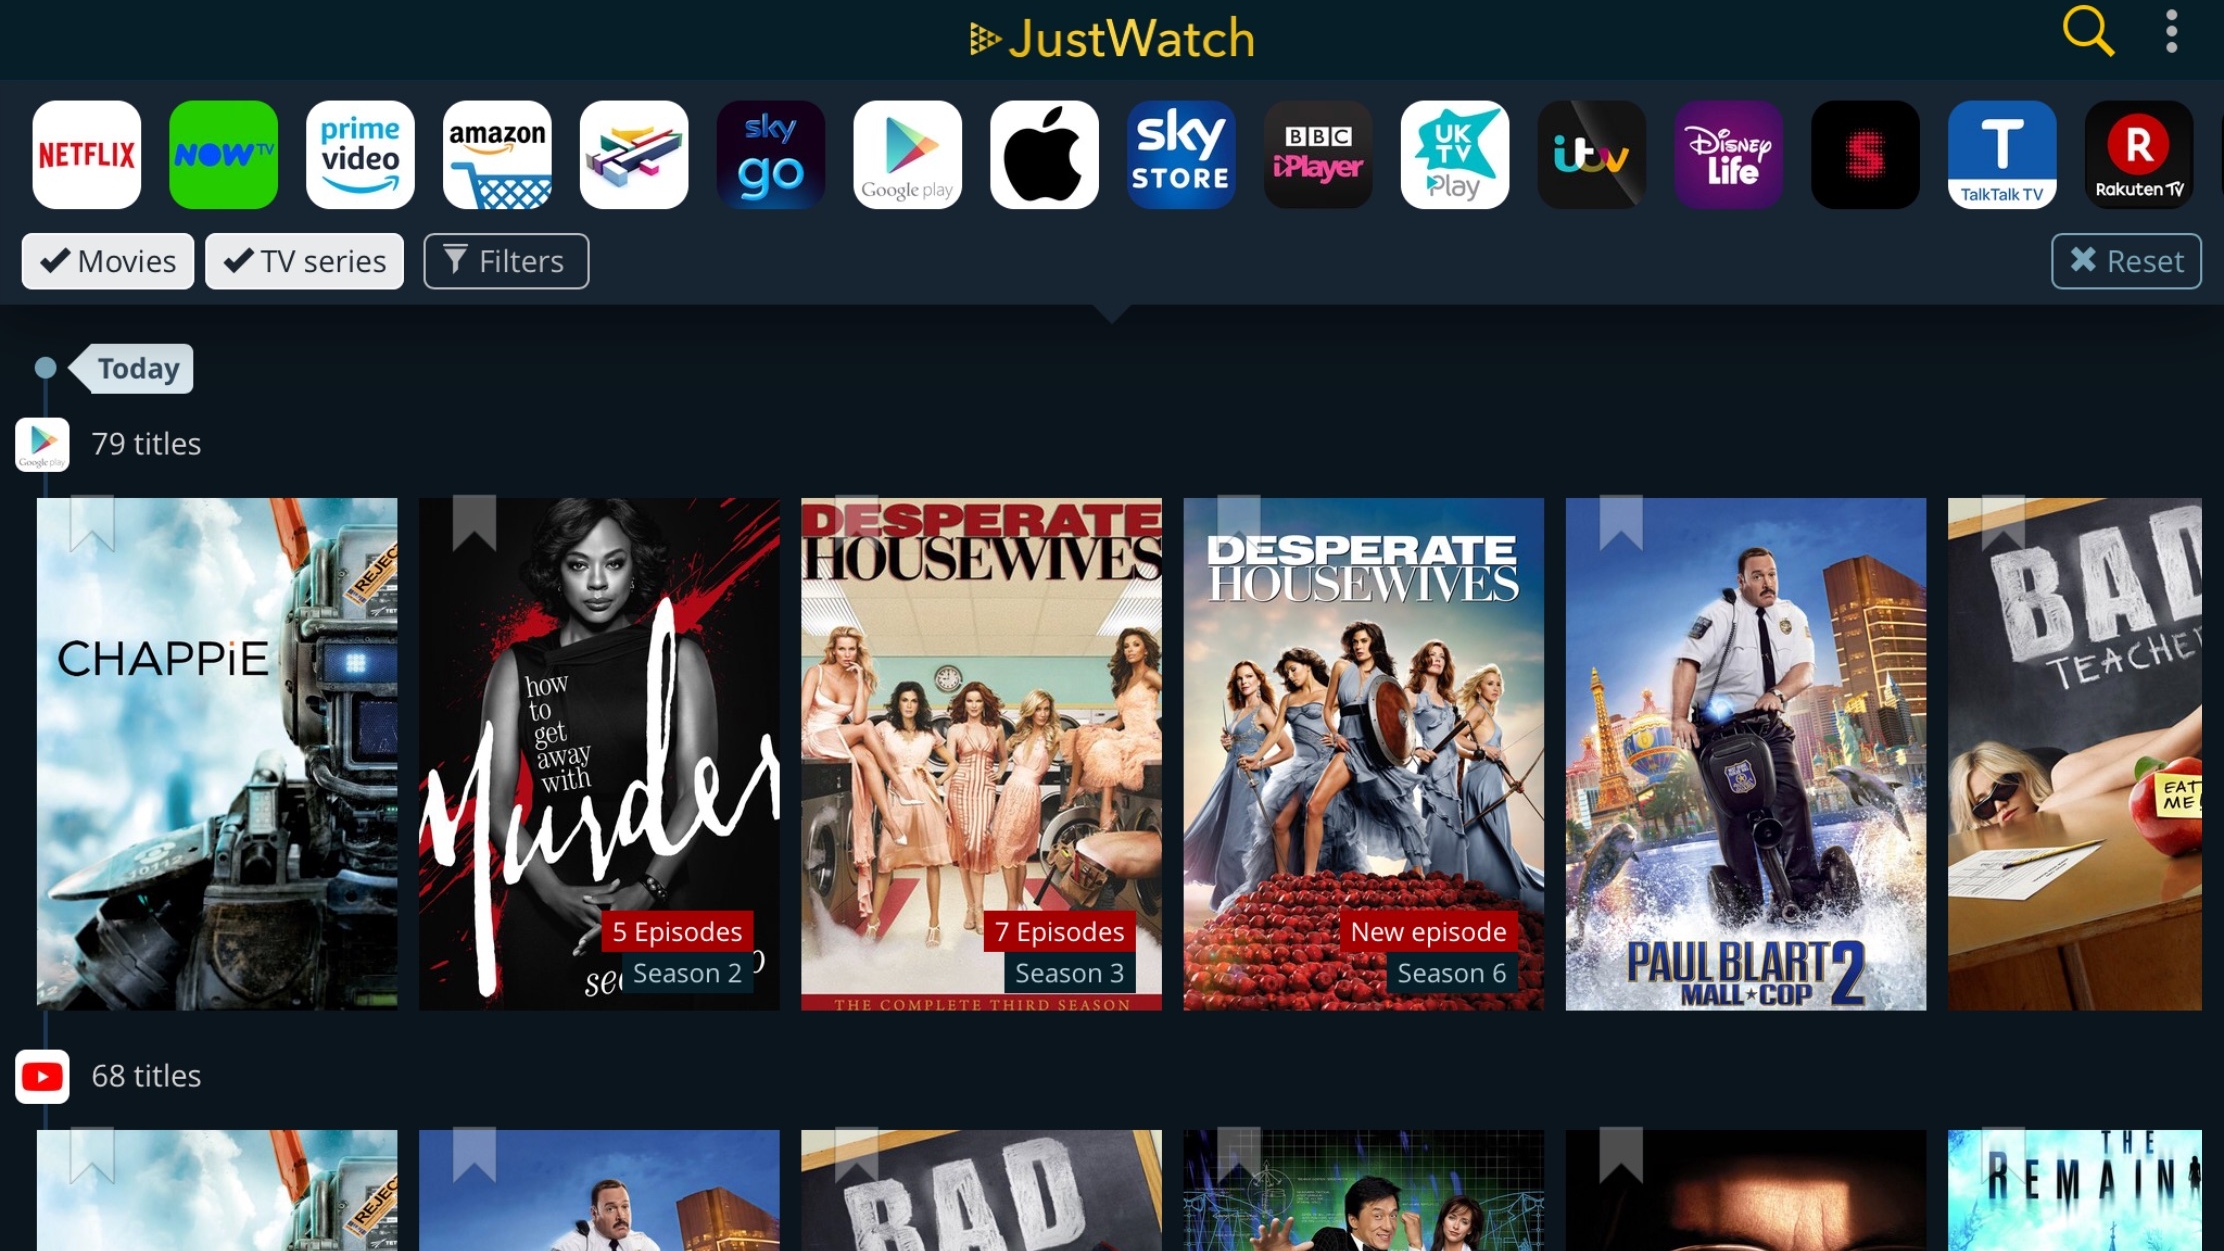 Is it safe to watch movies and TV shows on JustWatch?